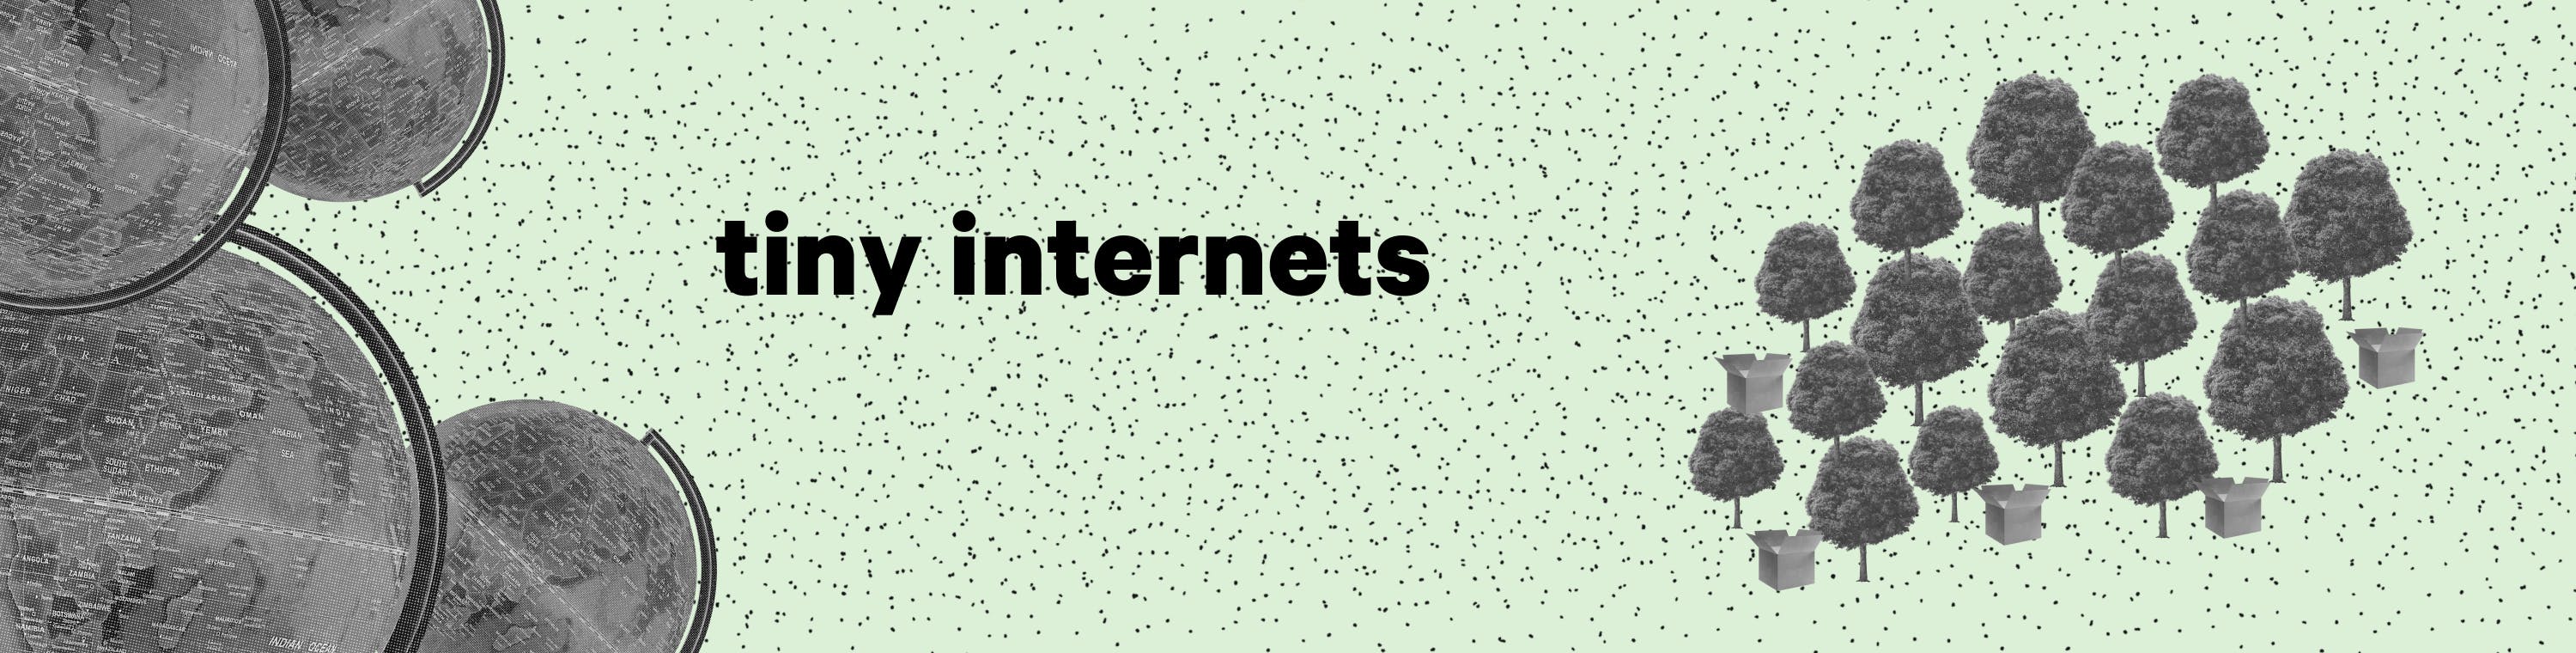 Thumbnail of tiny internets: sidewalks, geocaching, and more  ·  tiny internets